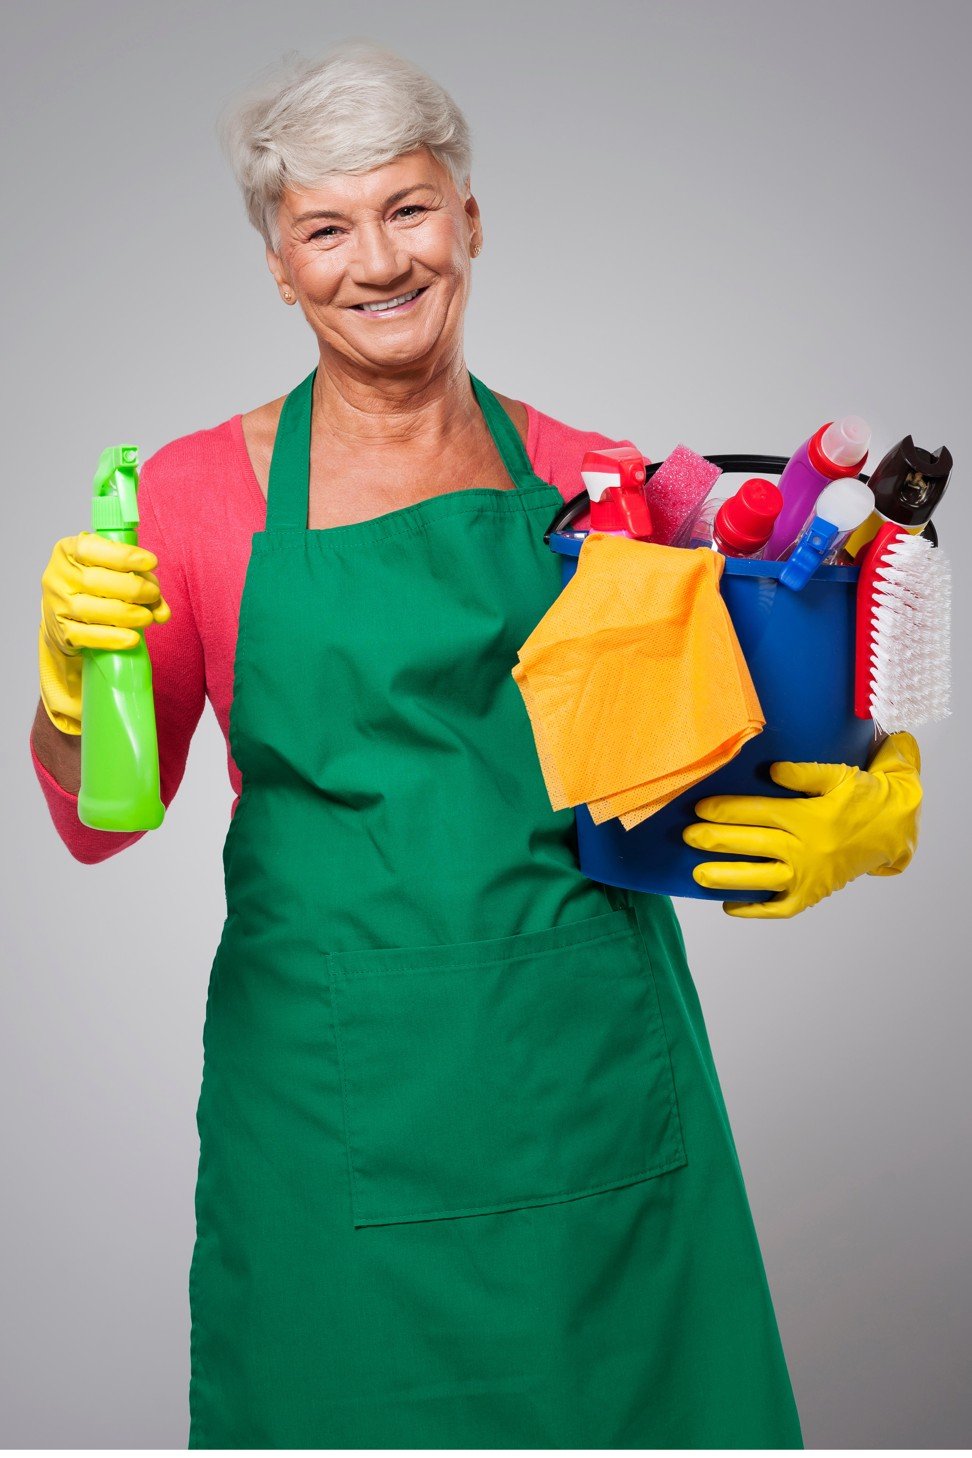 On average, elderly women spend 4.7 hours daily on housework, the research revealed. Photo: Alamy